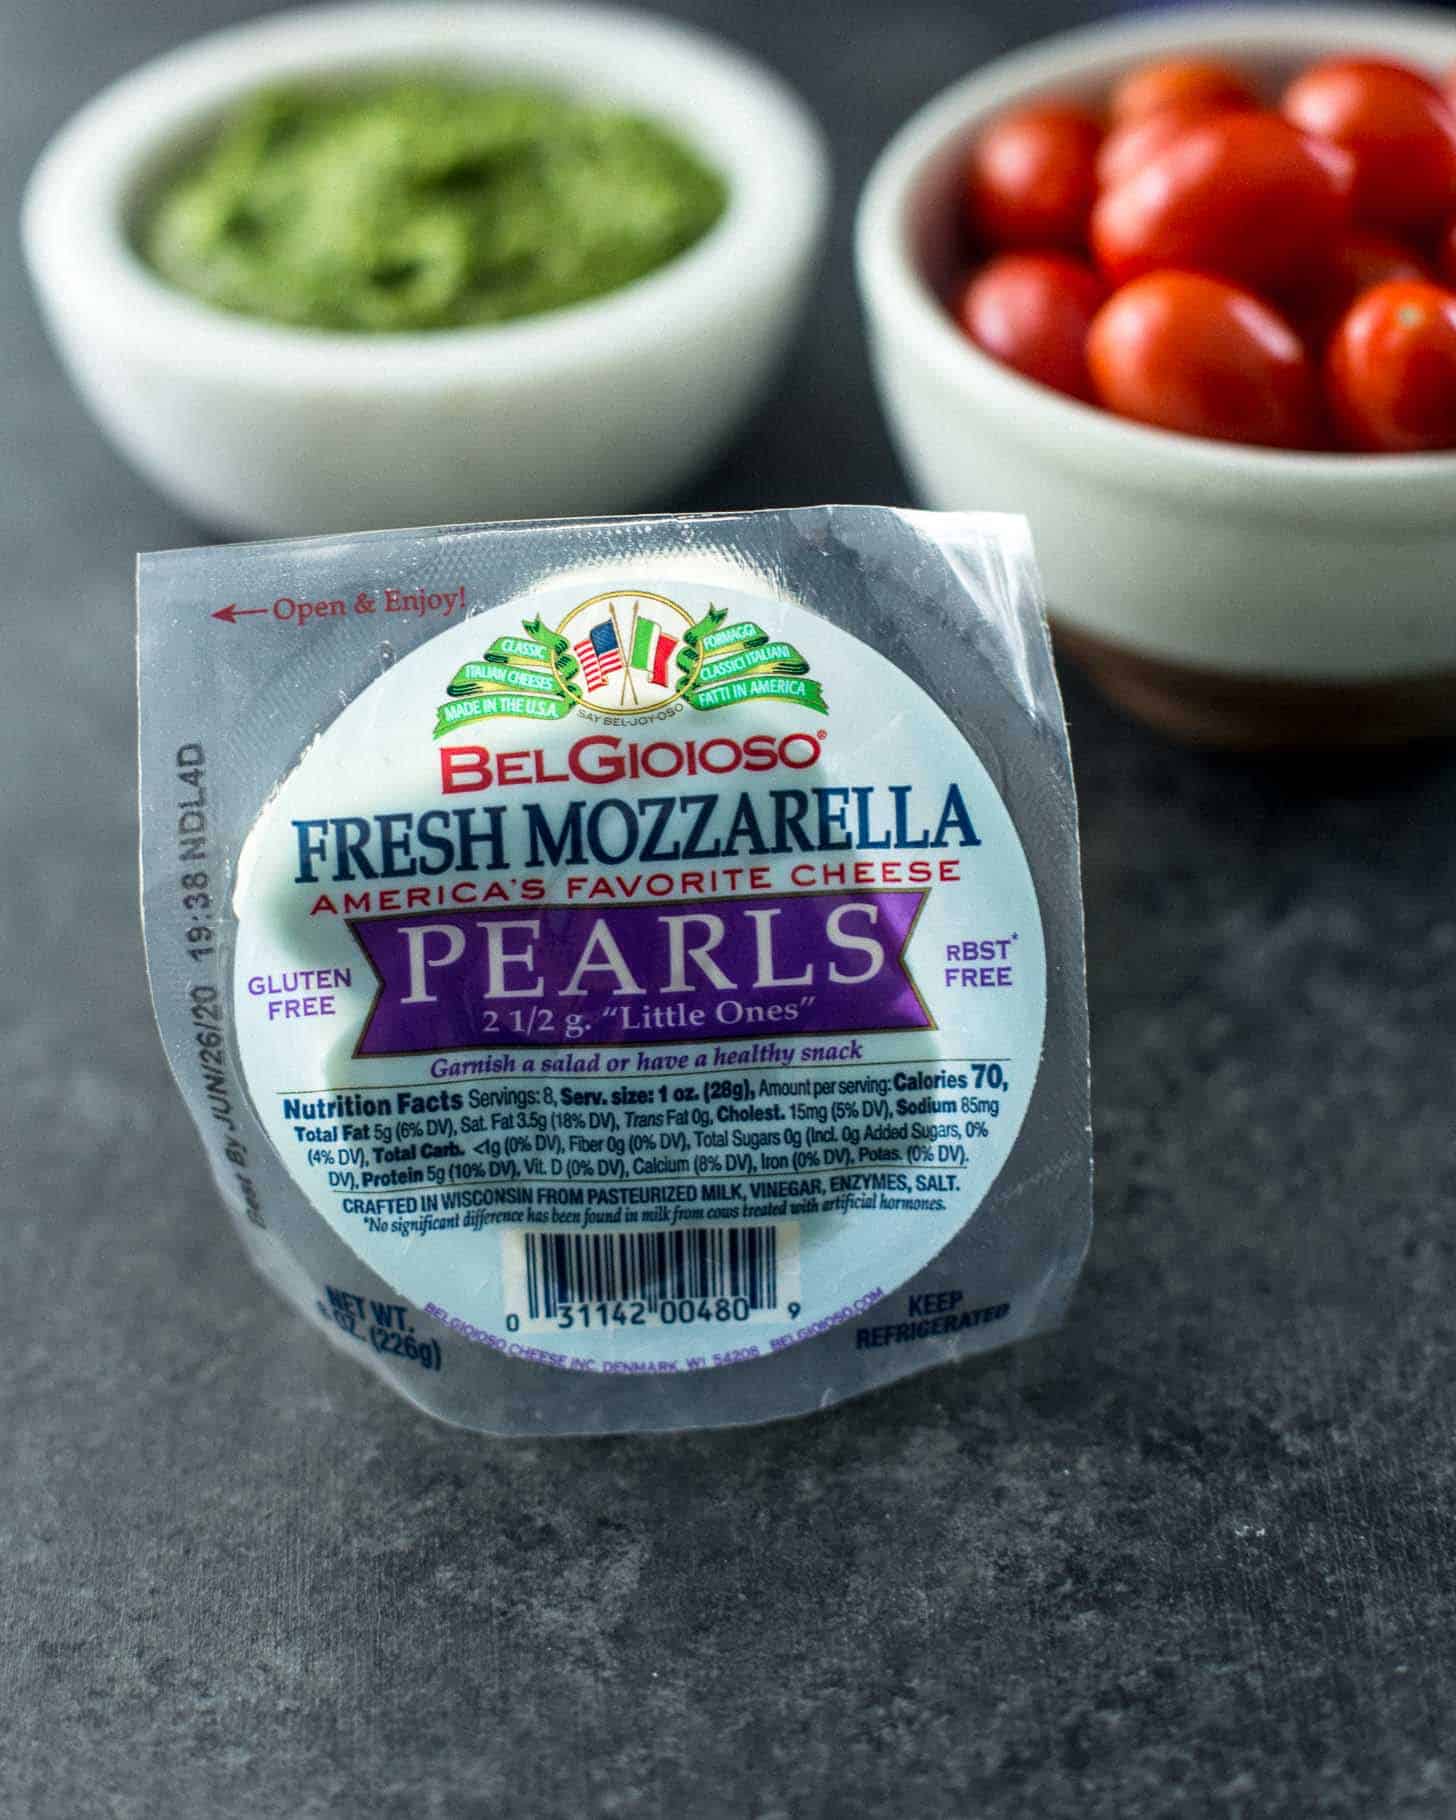 Mozzarella pearls in a clear package